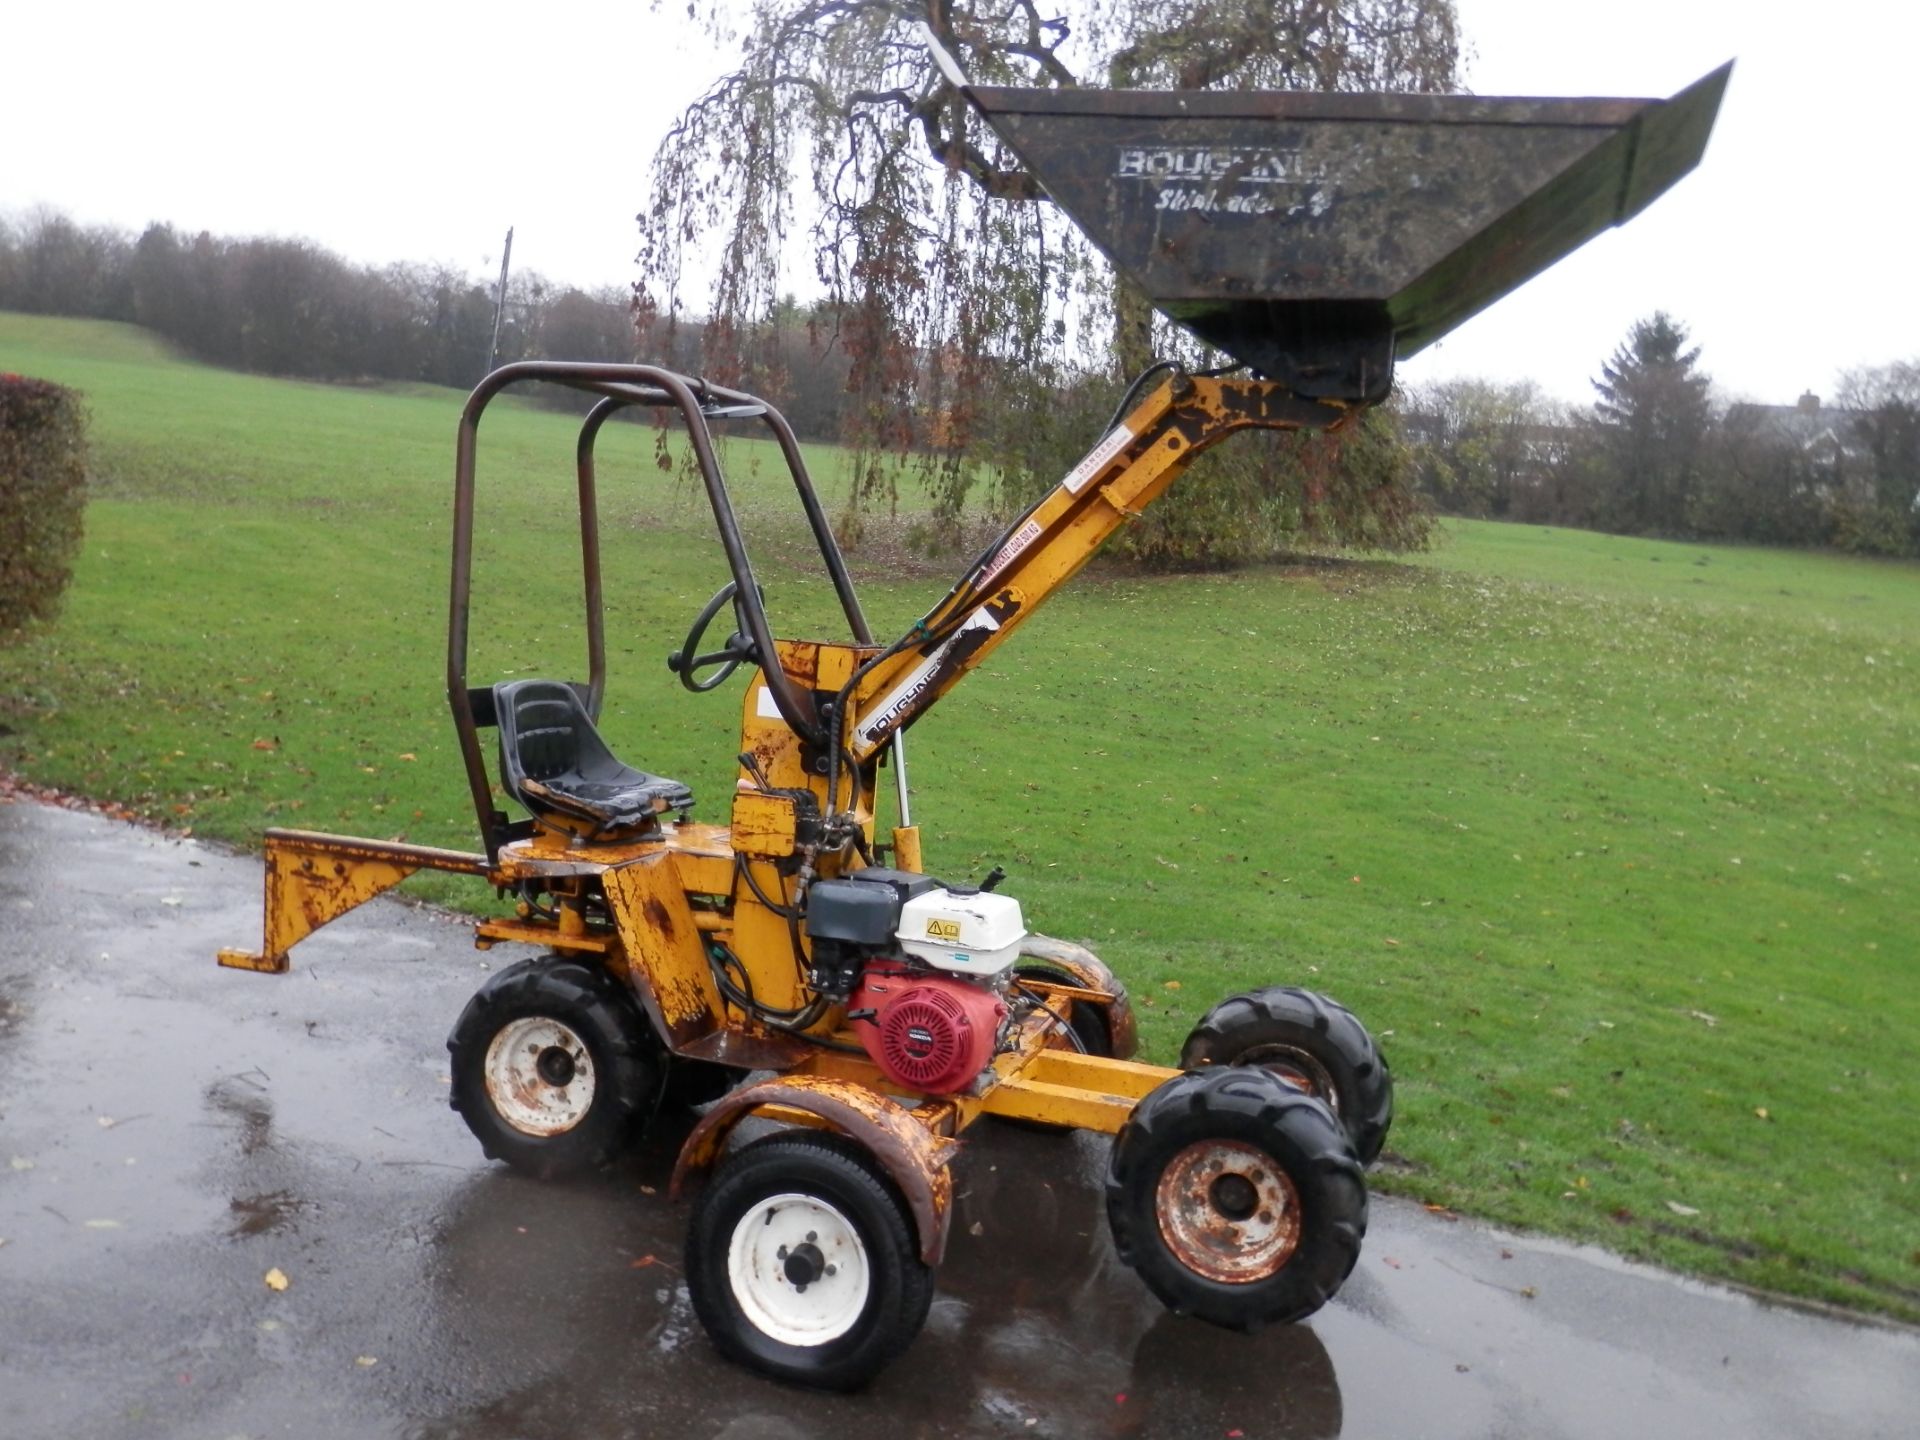 ALL WORKING ROUGHNECK 750 KG HIGH LIFT DUMPER ON ITS OWN TRAILER. EASY TO HITCH. - Image 2 of 18